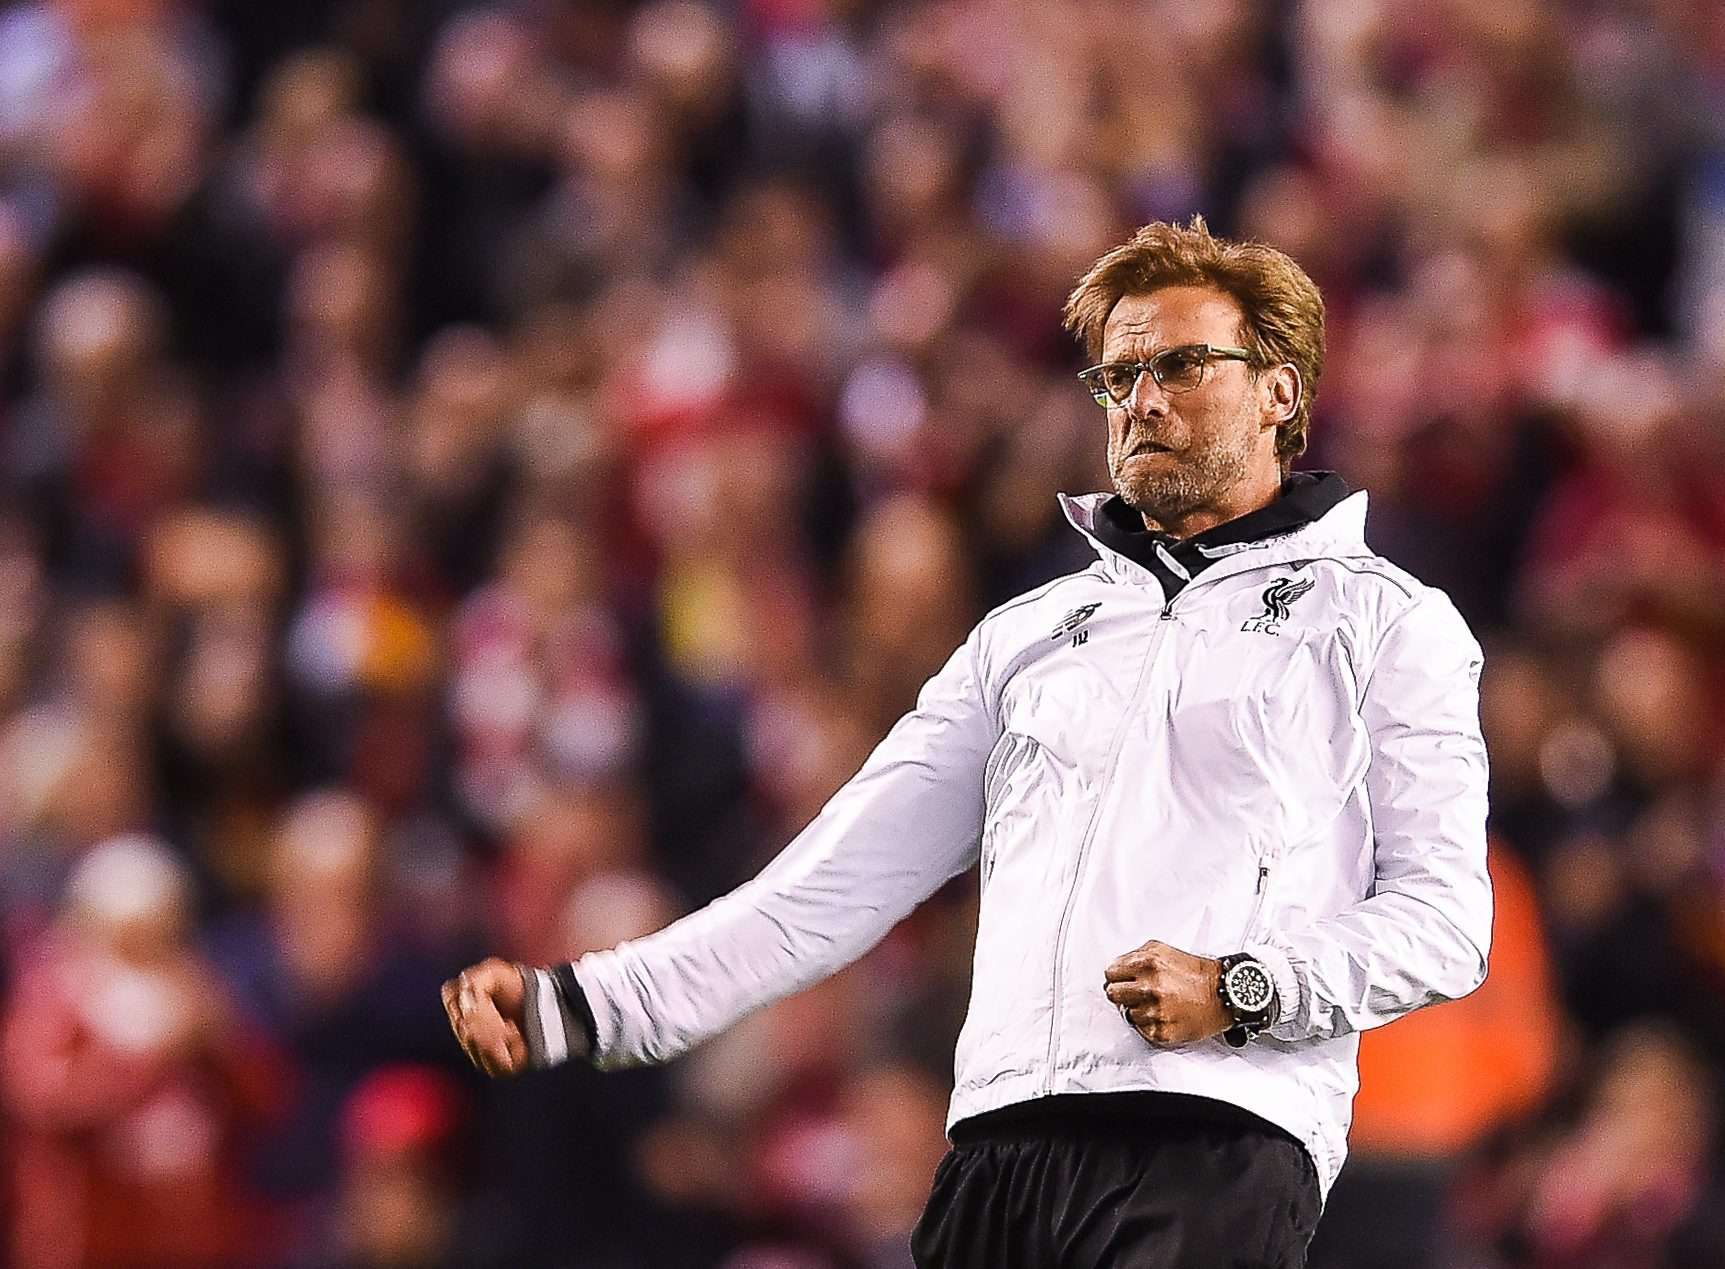 Liverpool manager Juergen Klopp has guided his new team to two cup finals since his appointment in October. Photo: EPA